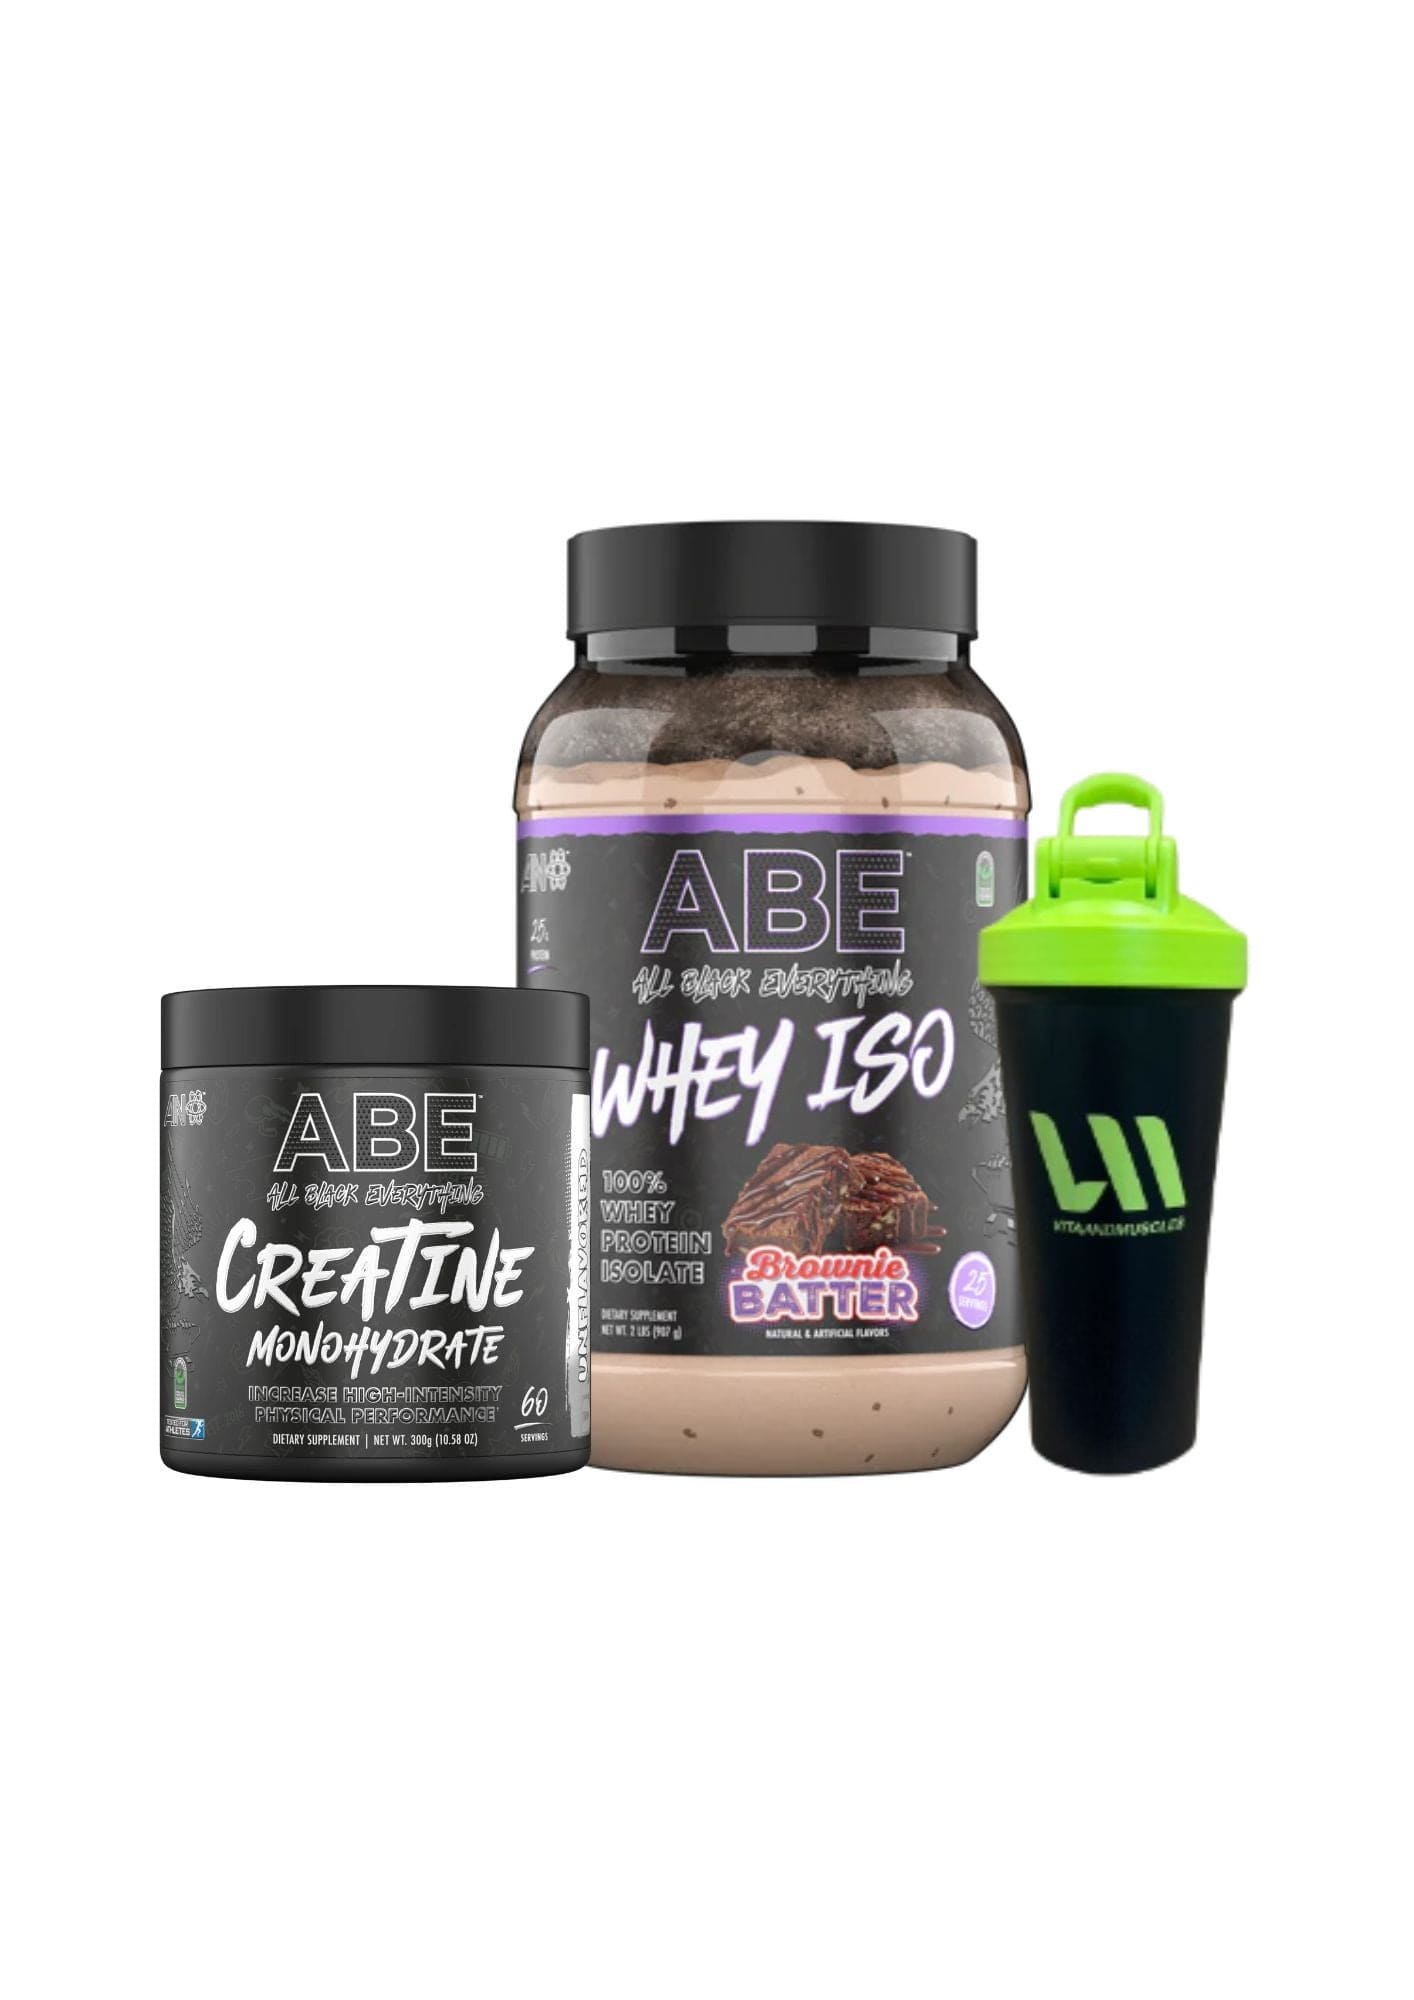 All Black Everything ABE ISO Whey Protein Powder Whey Isolate 2lb